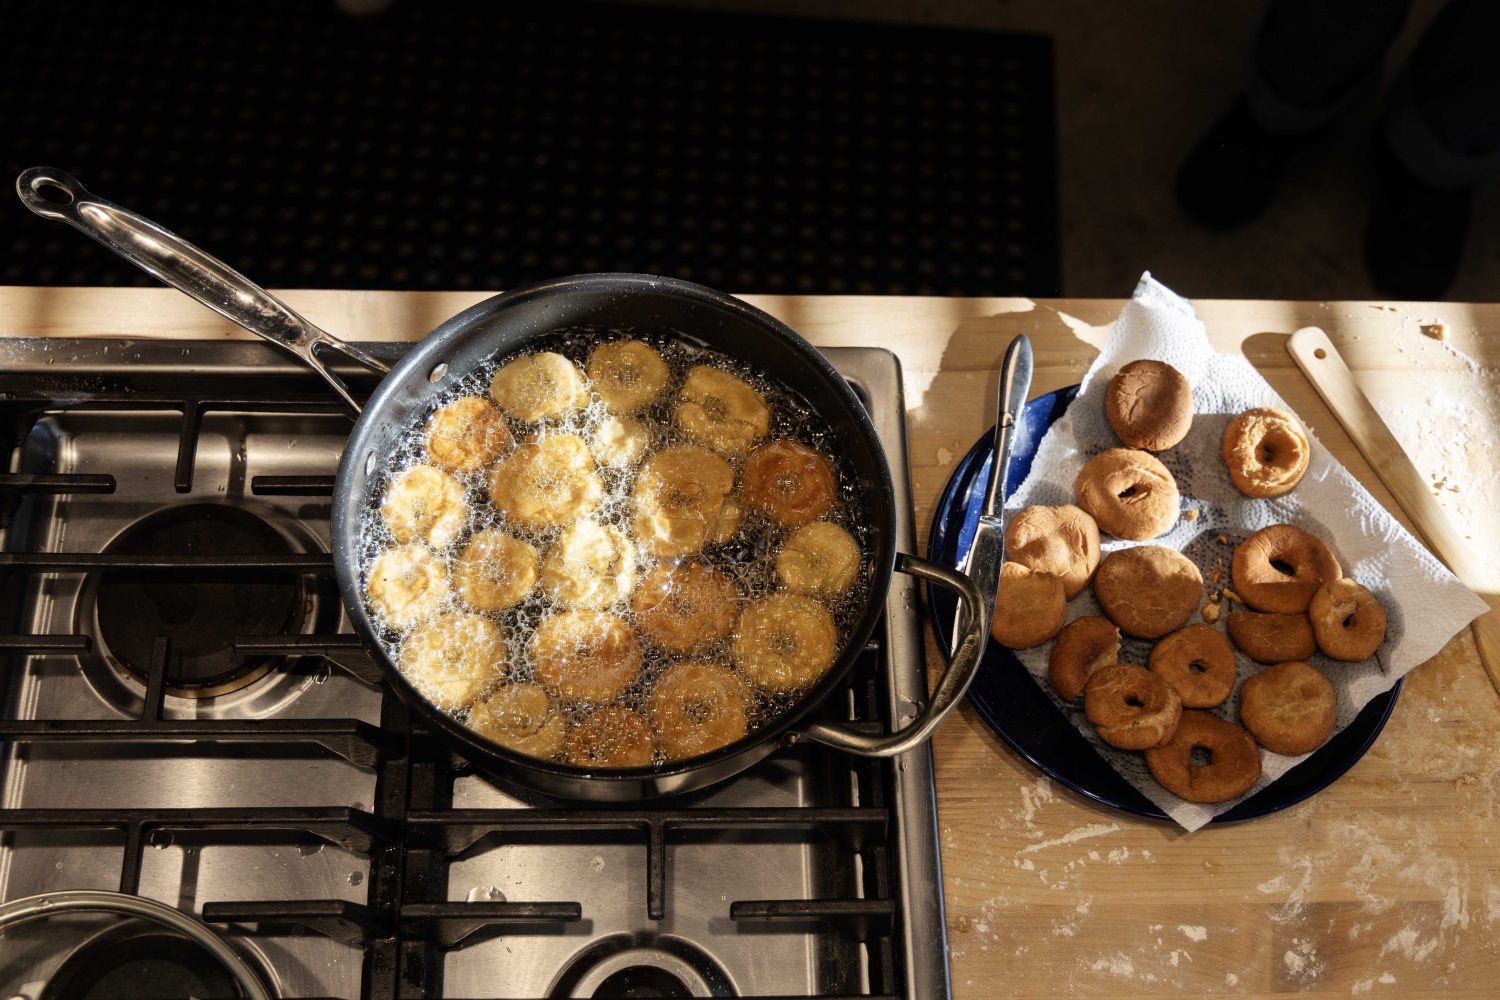 A saucepan full of beignets frying in hot oil, pictured next to a plate full of cooked beignets that have just finished frying